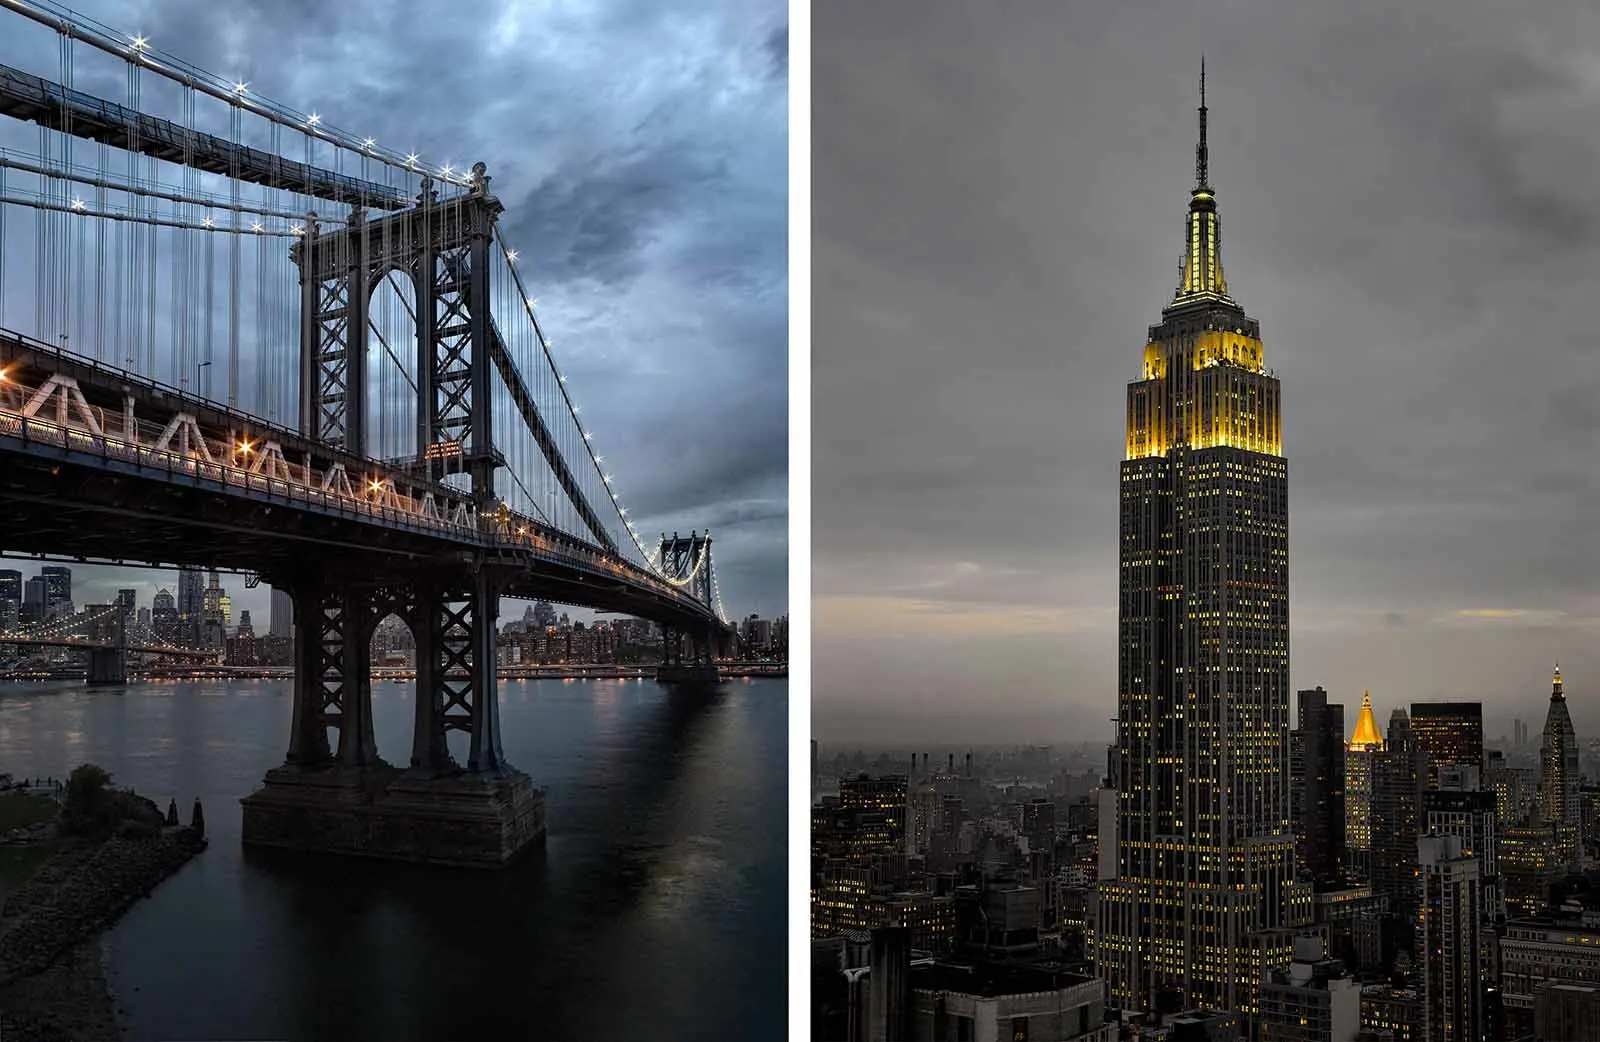 on the left the manhattan bridge by night, one the right the empire state building by night.